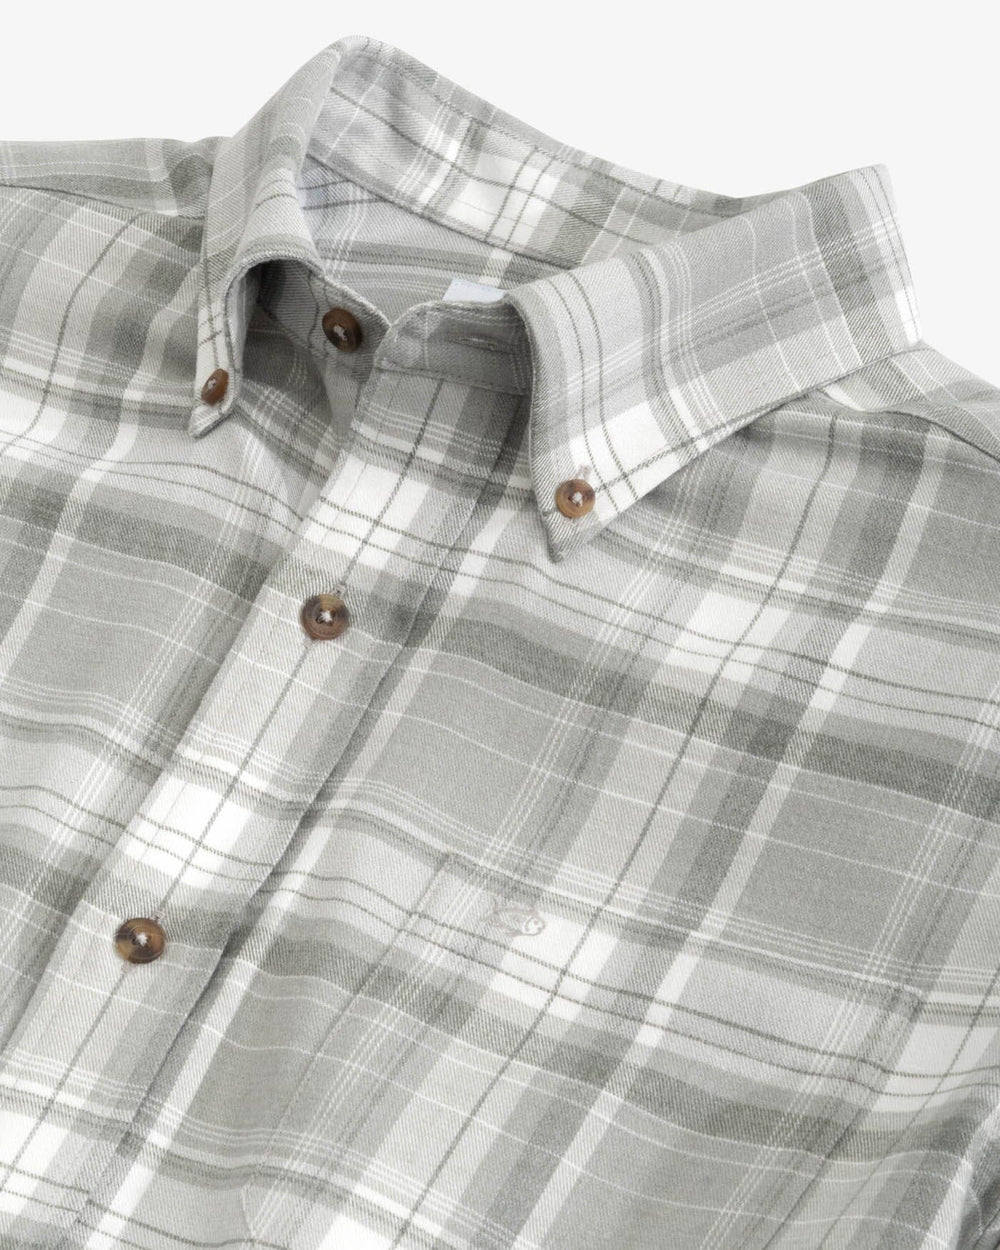 The detail view of the Southern Tide Heather Avondale Plaid Sport Shirt by Southern Tide - Heather Ultimate Grey